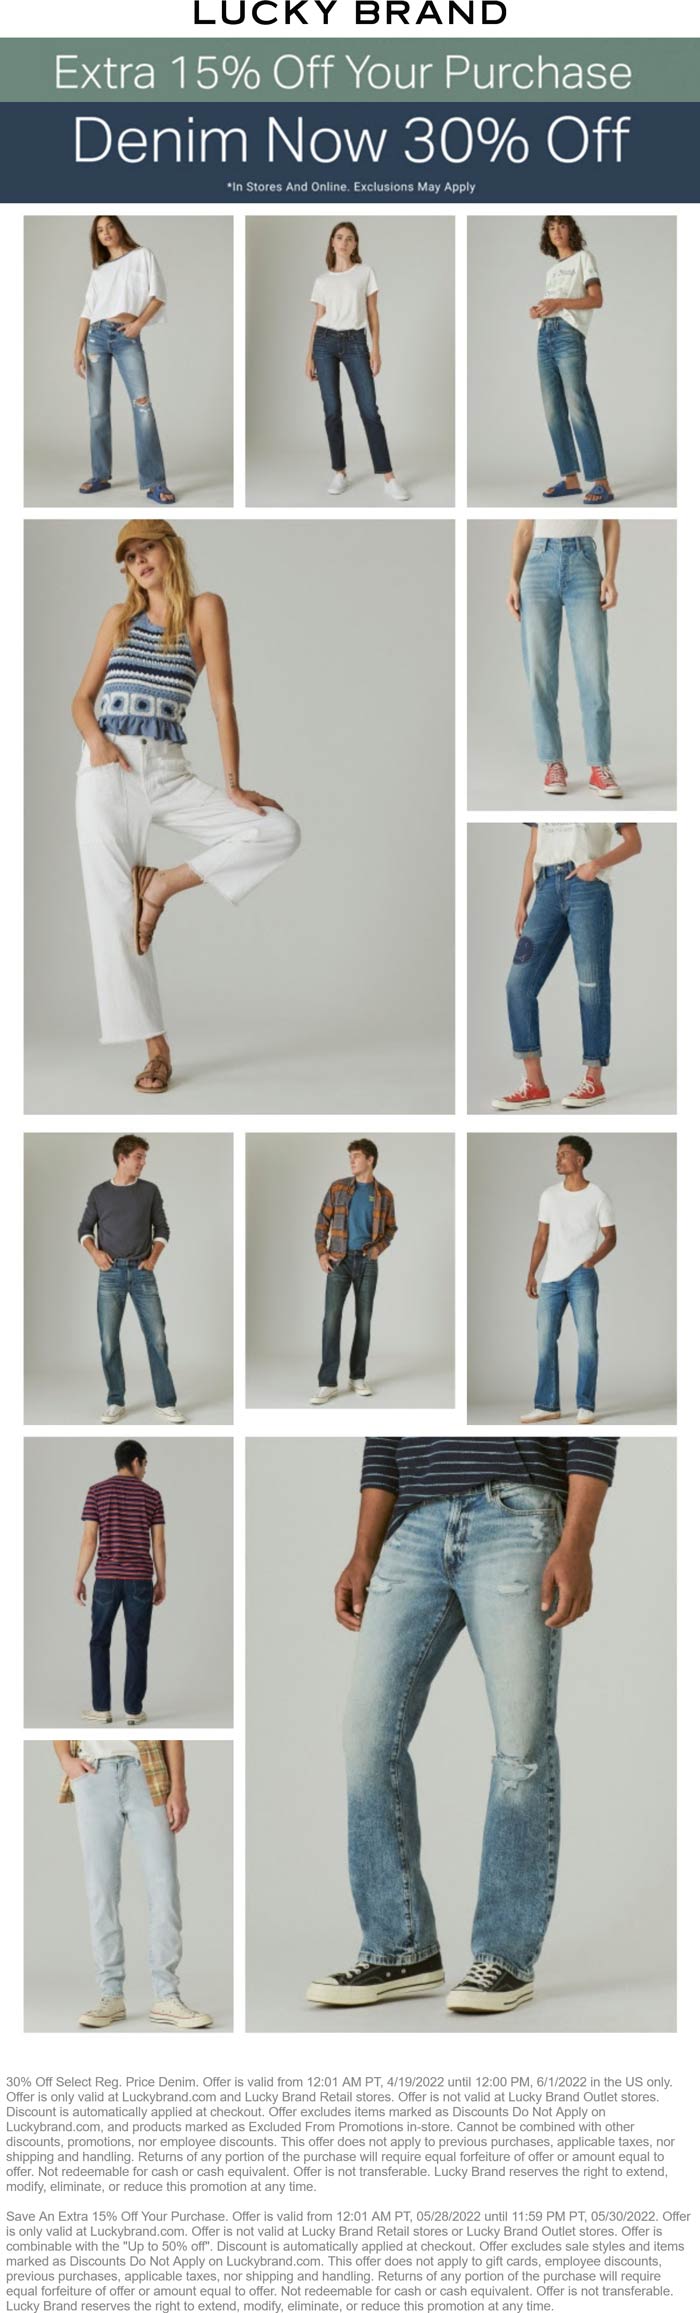 Lucky Brand stores Coupon  15-30% off at Lucky Brand #luckybrand 